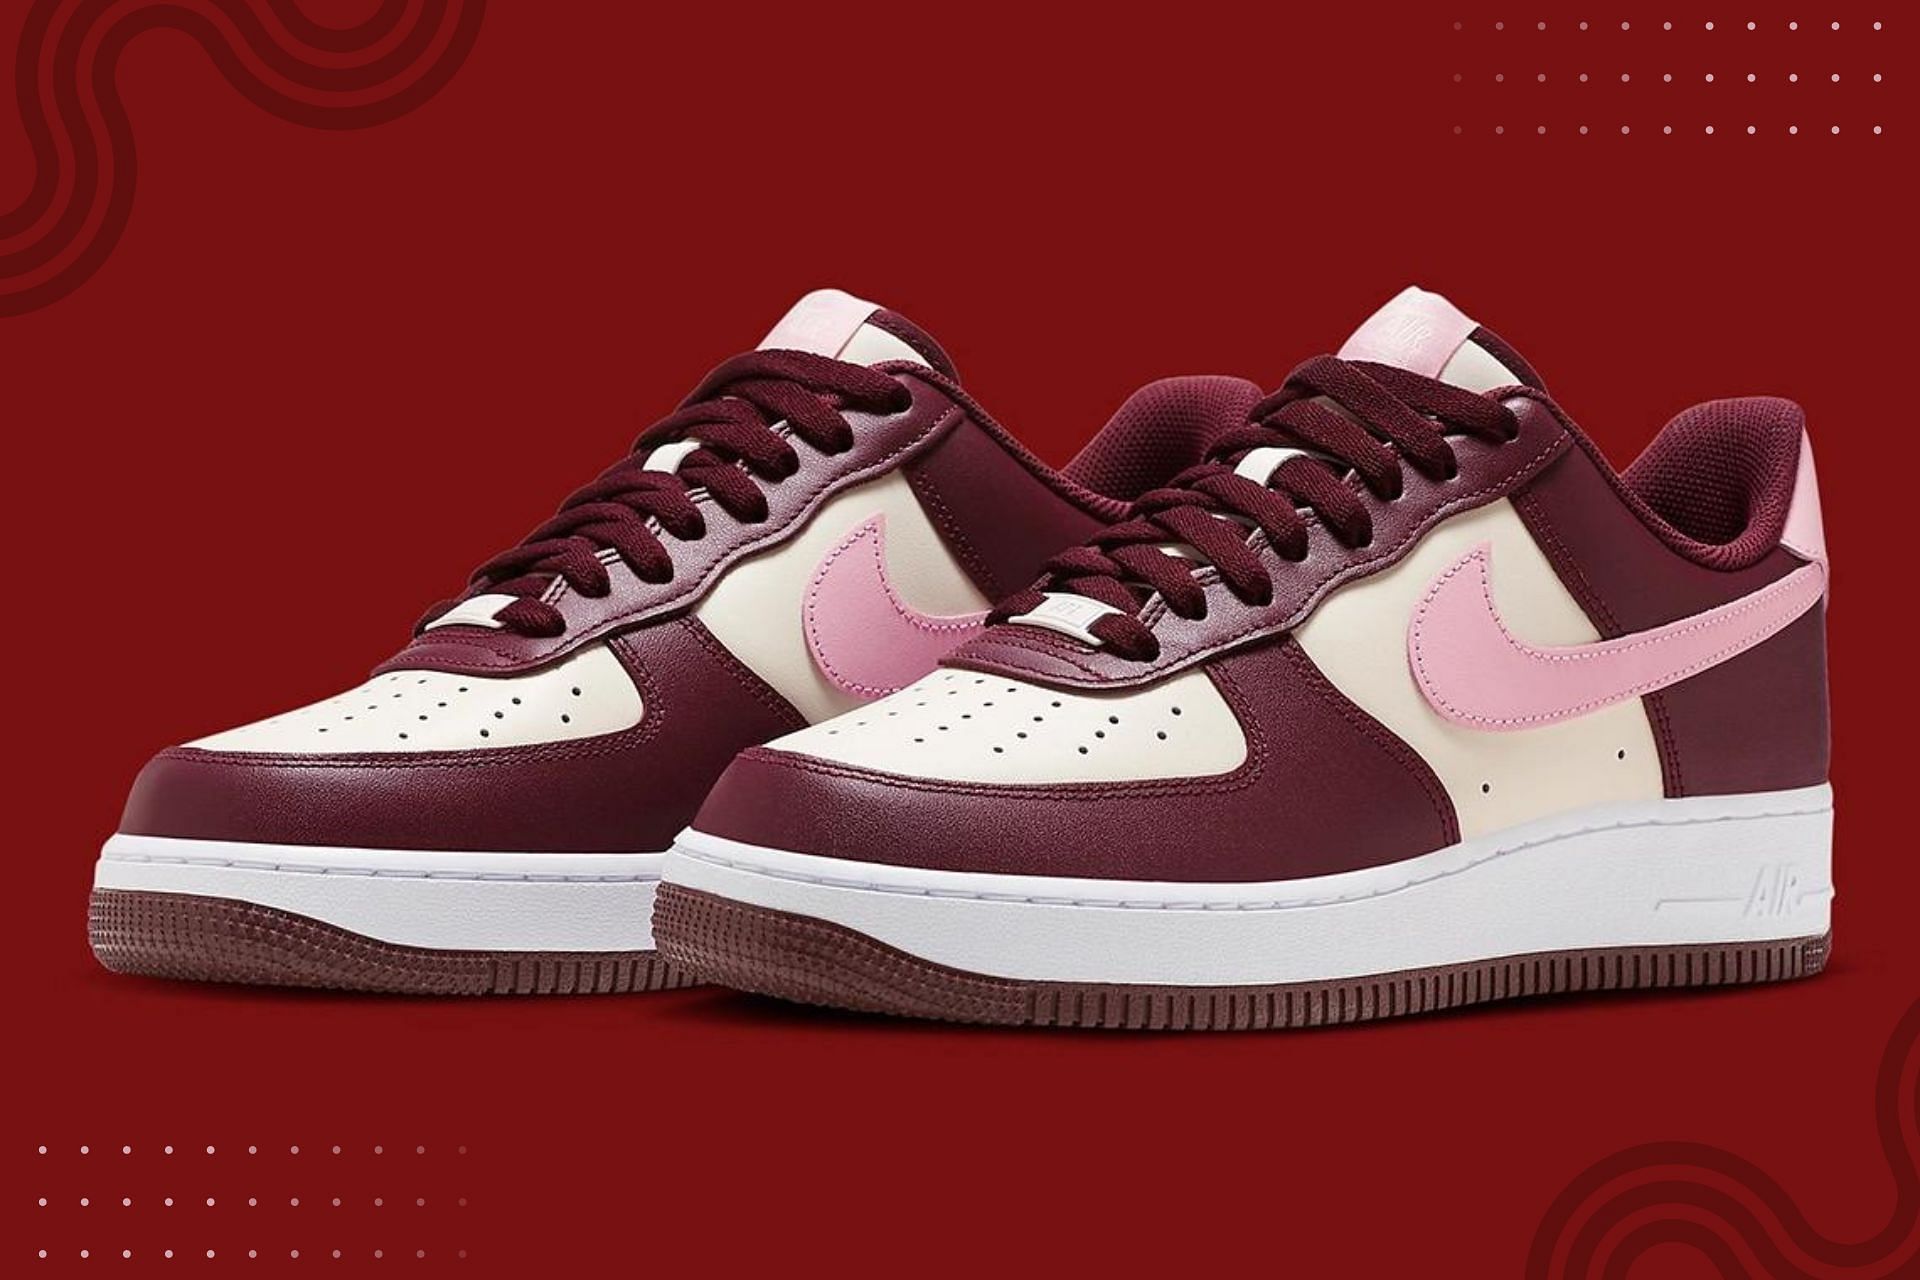 Nike air force low valentine s day. Nike Air Force 1 Low “Valentine’s Day” 2023. Nike Air Force Valentines Day 2023. Nike Air Force 1 Low Valentine s Day 2023. Nike Air Force 1 Valentine's Day 2023.